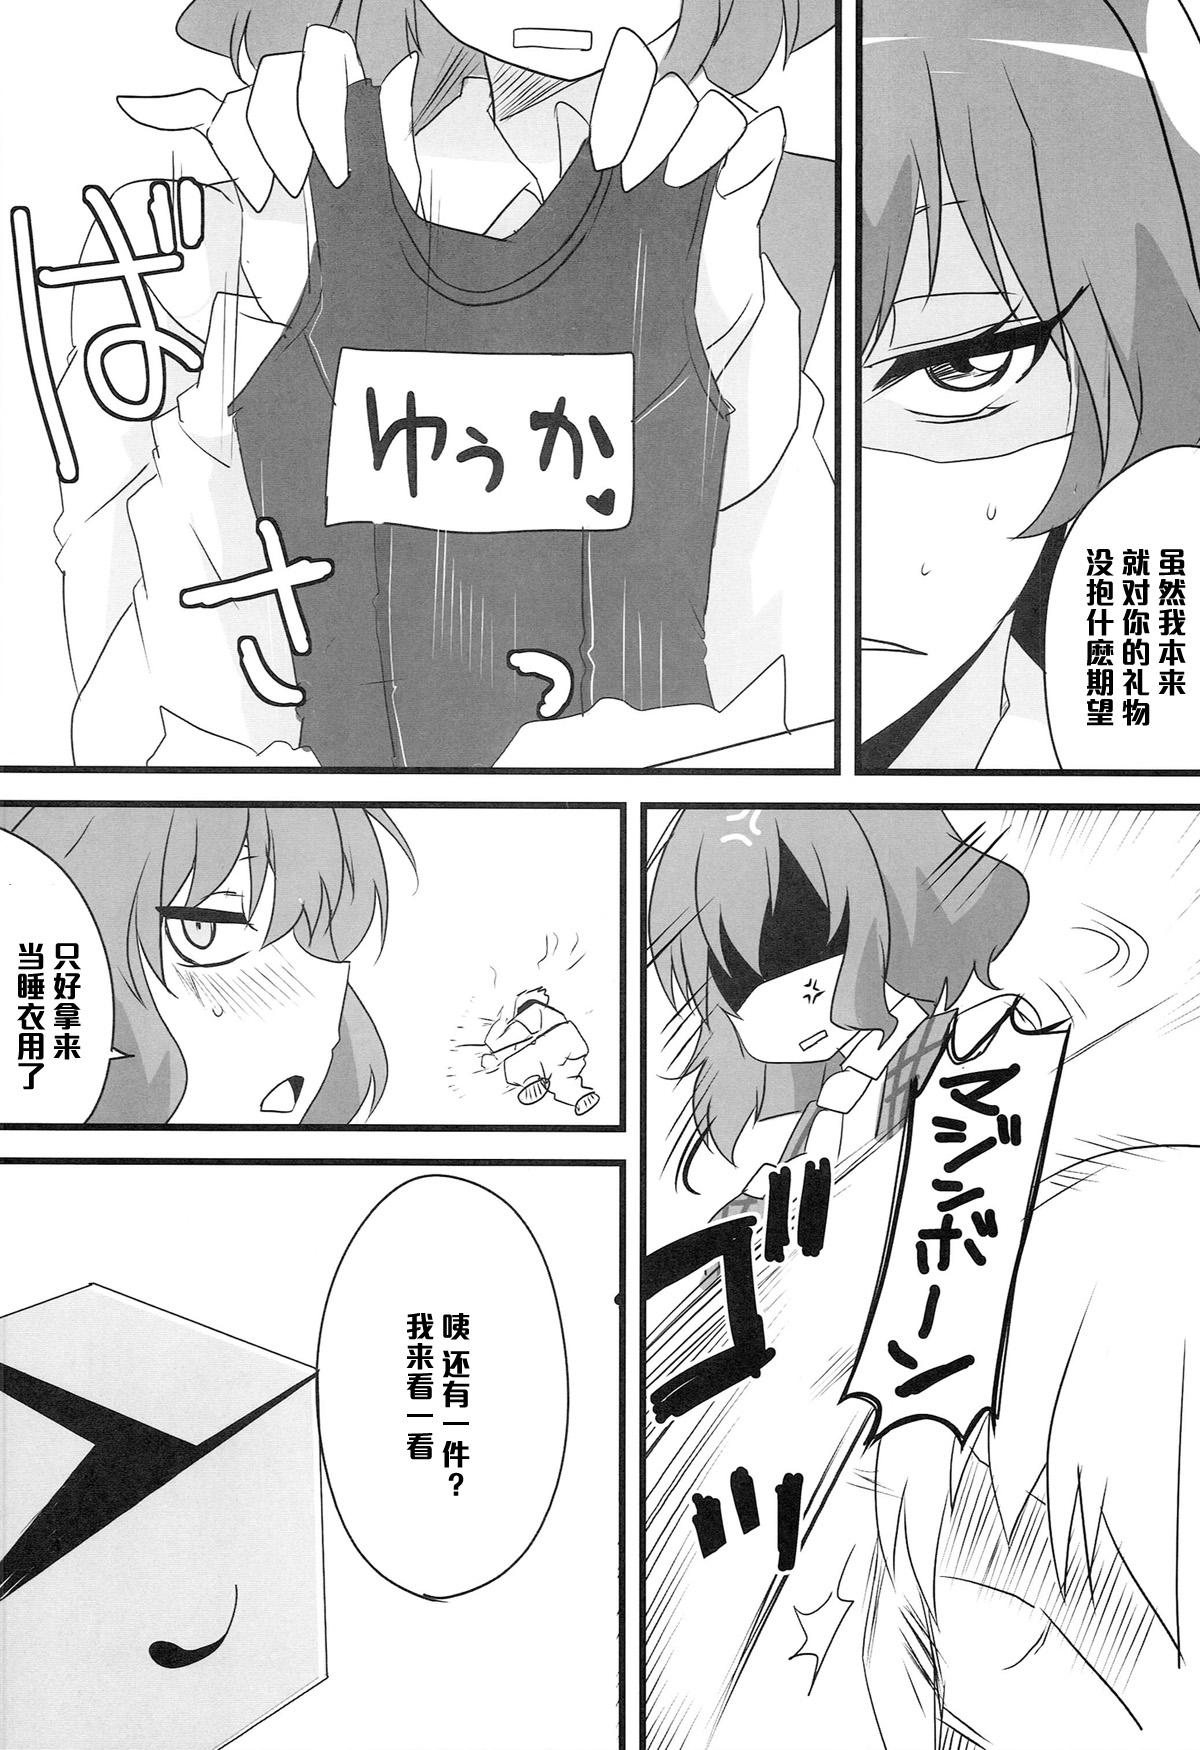 Tattooed Yuuka 13 - Touhou project Oral Sex Porn - Page 5